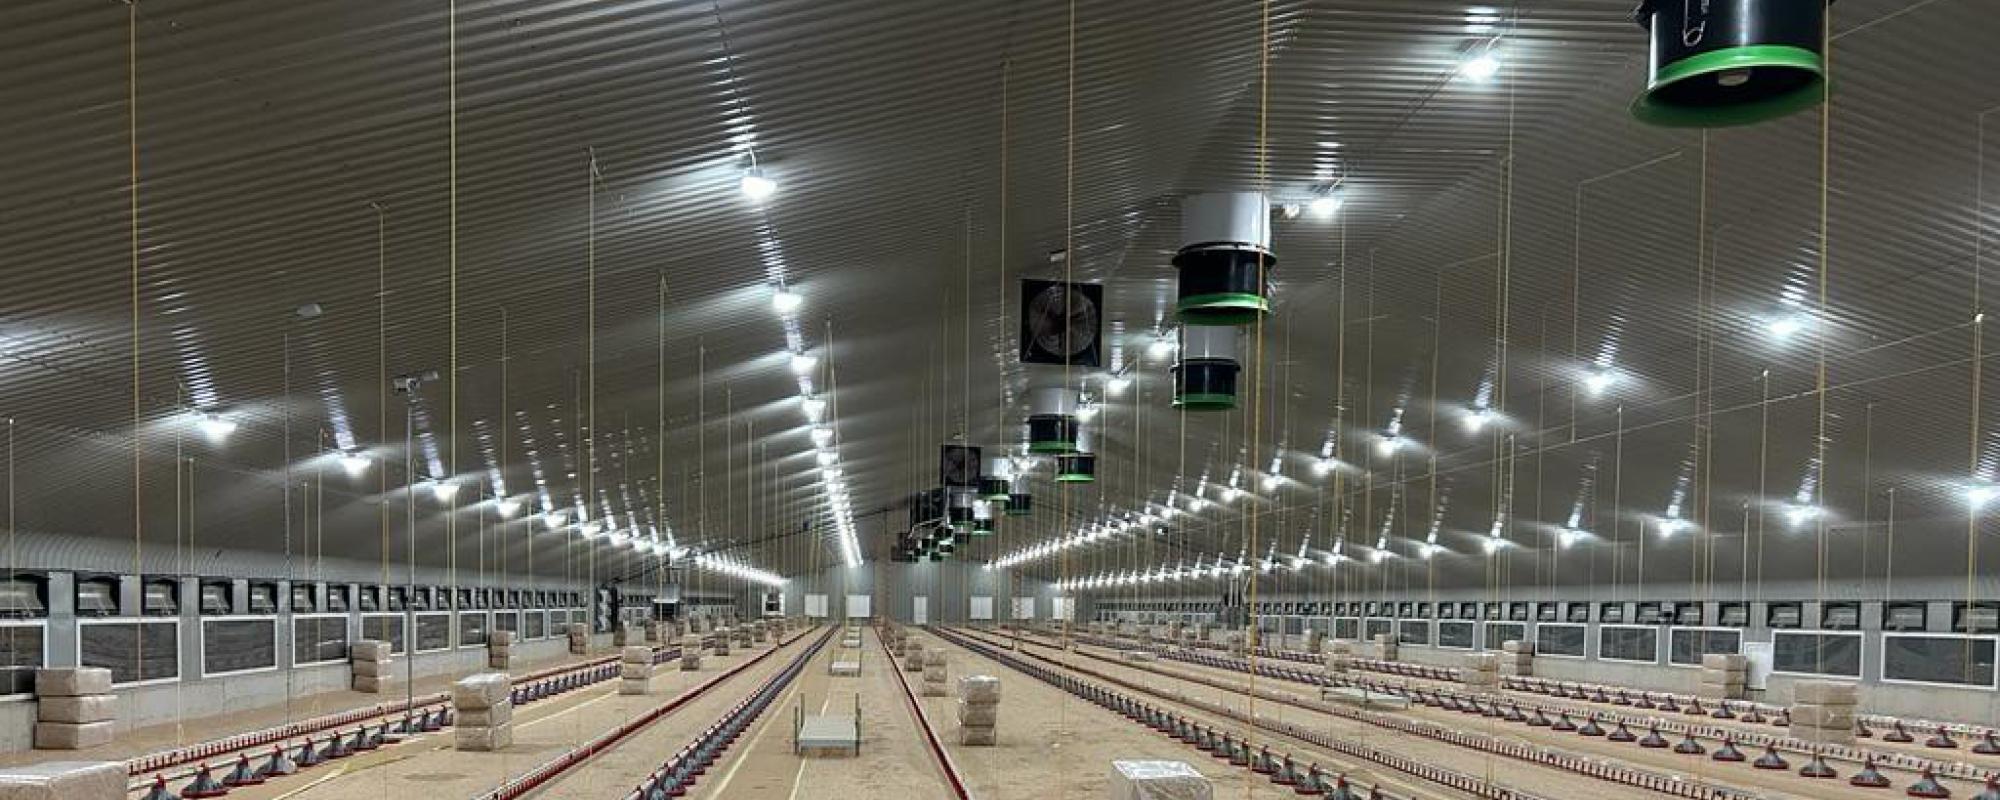 Agricultural lighting for poultry farming